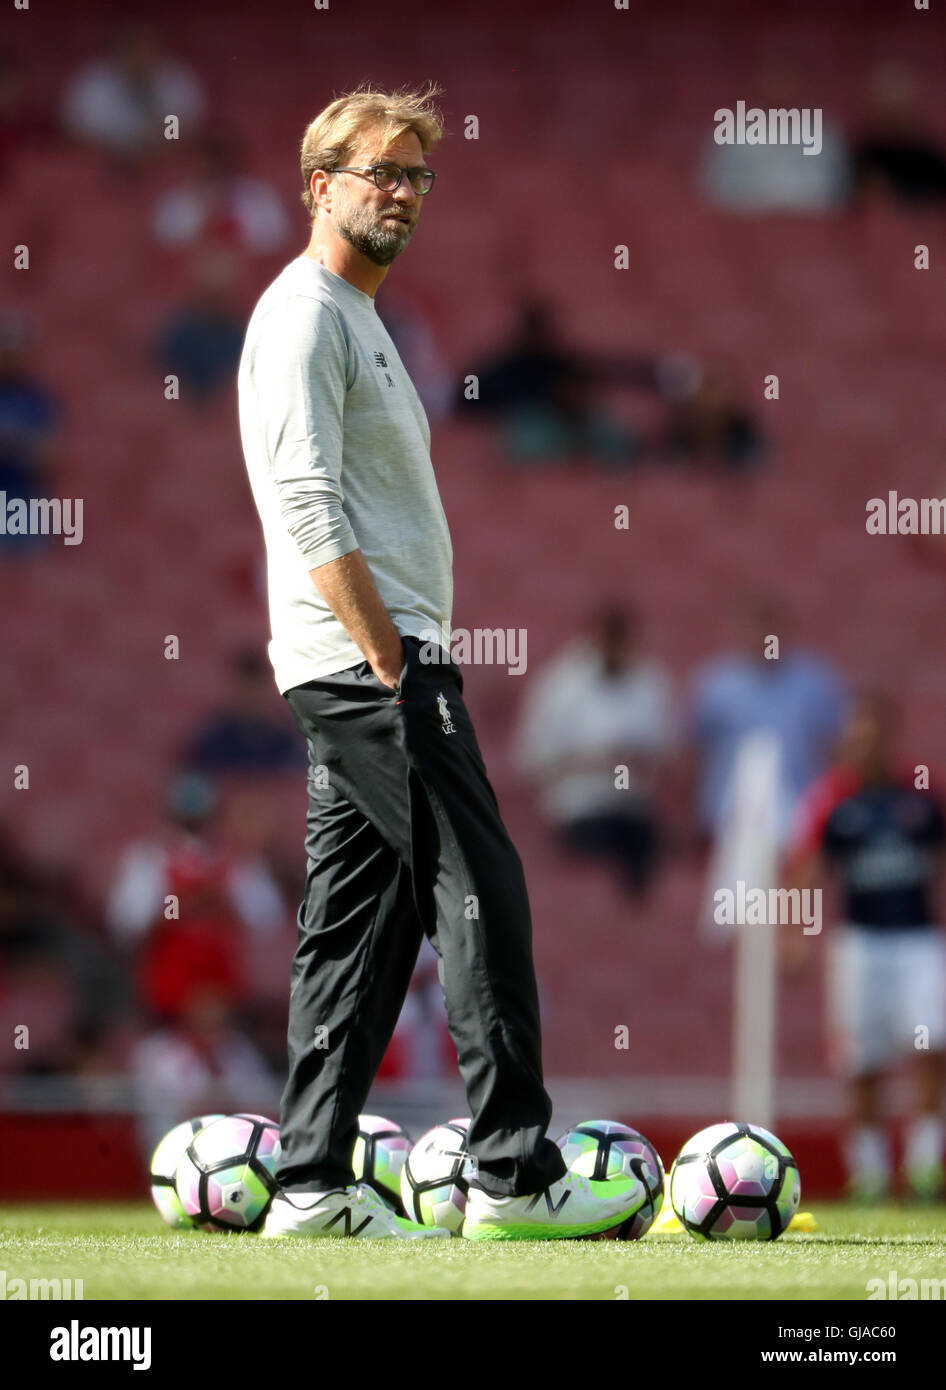 Liverpool manager Jurgen Klopp before the Premier League match at the Emirates Stadium, London. PRESS ASSOCIATION Photo. Picture date: Sunday August 14, 2016. See PA story SOCCER Arsenal. Photo credit should read: Nick Potts/PA Wire. RESTRICTIONS: No use with unauthorised audio, video, data, fixture lists, club/league logos or 'live' services. Online in-match use limited to 75 images, no video emulation. No use in betting, games or single club/league/player publications. Stock Photo